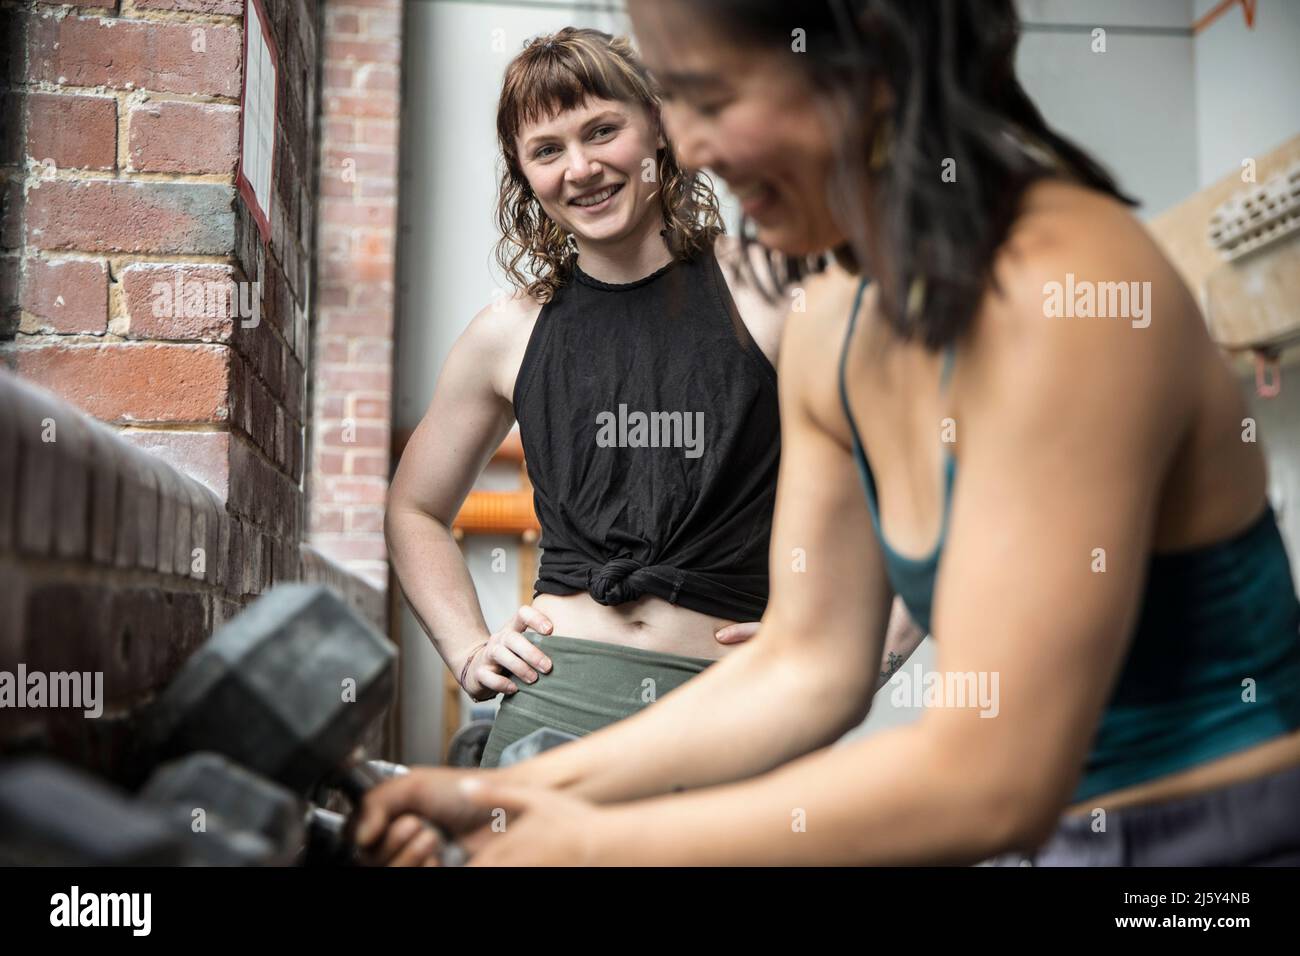 Smiling women friends working out at gym Stock Photo